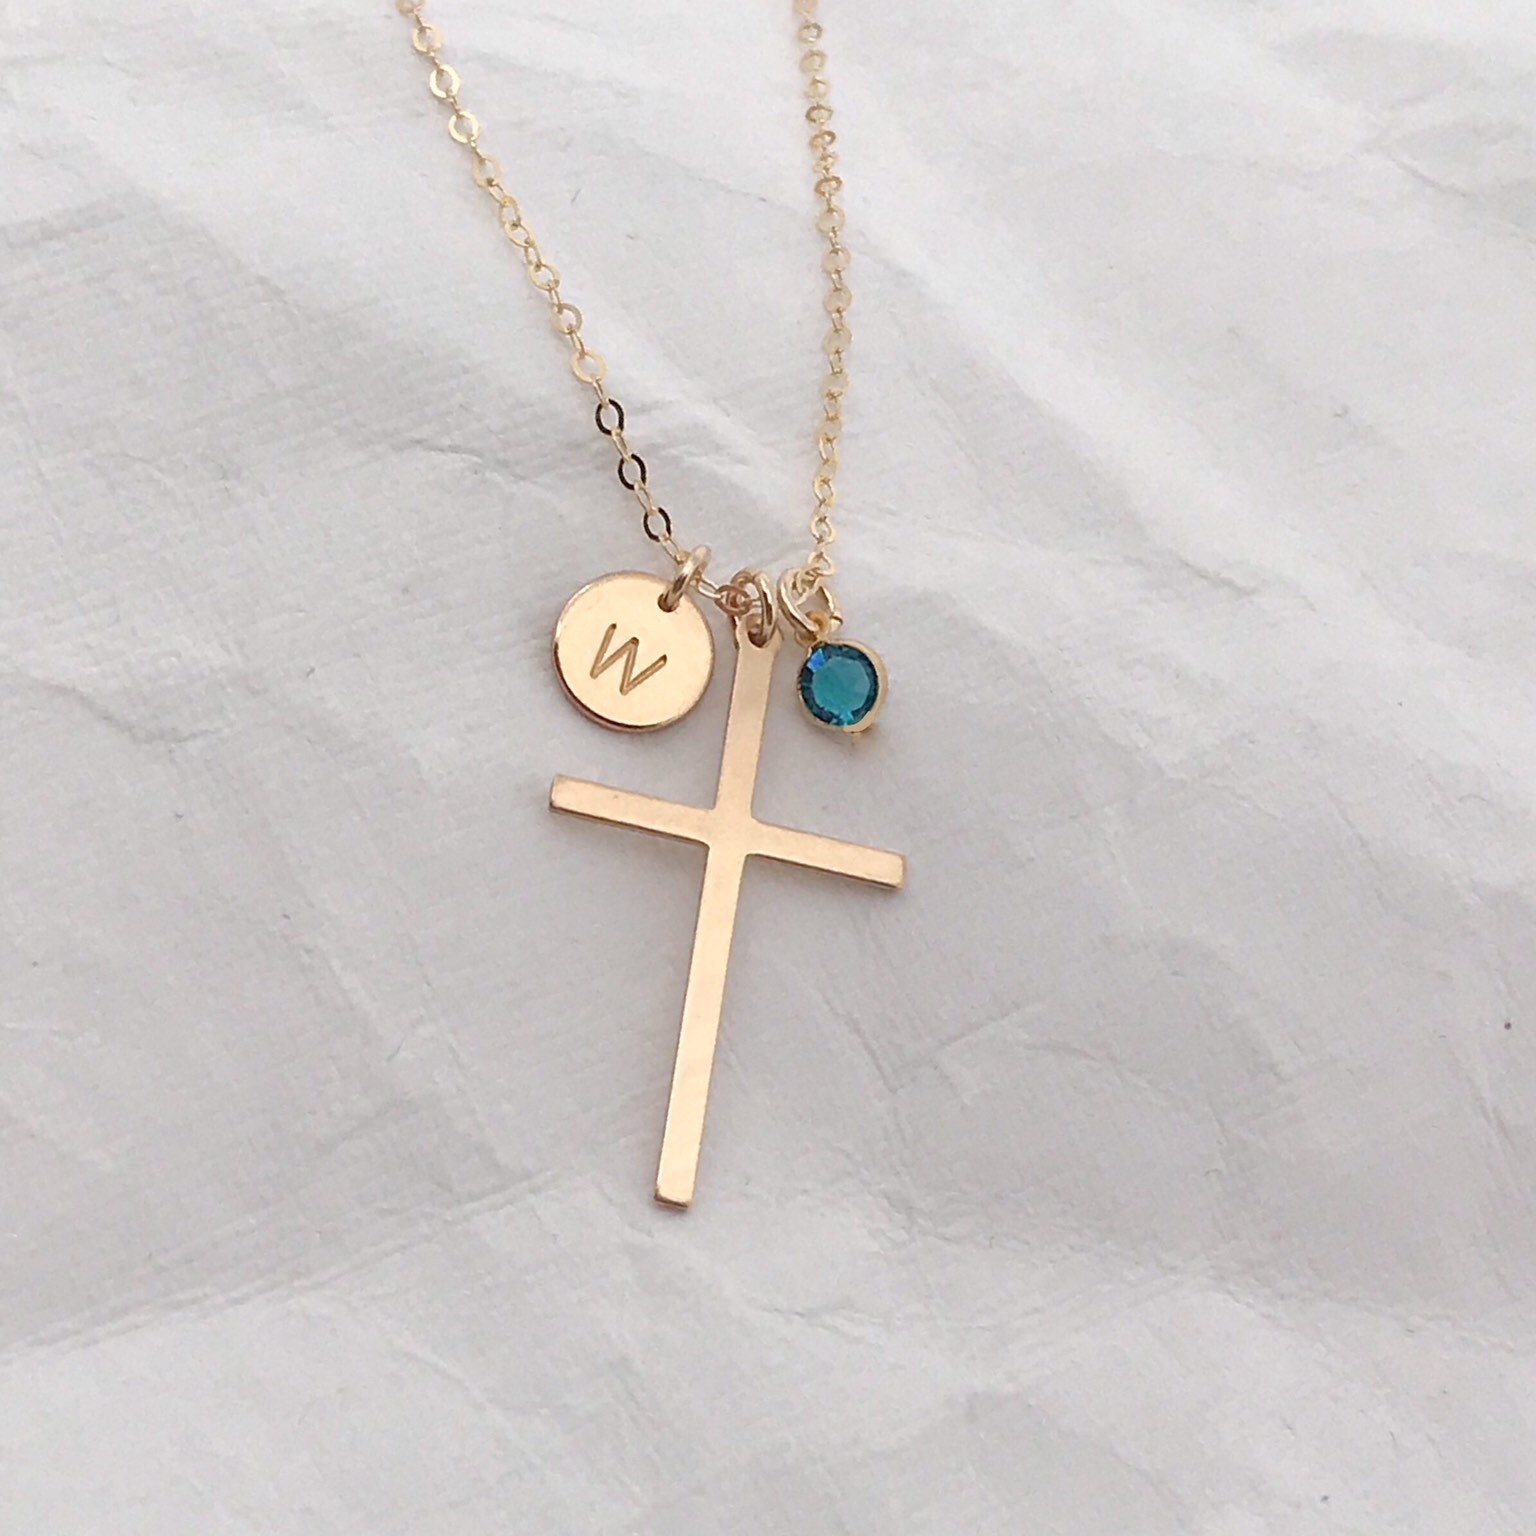 Gold cross necklace-Birthstone necklace-Handstamped initial | Etsy